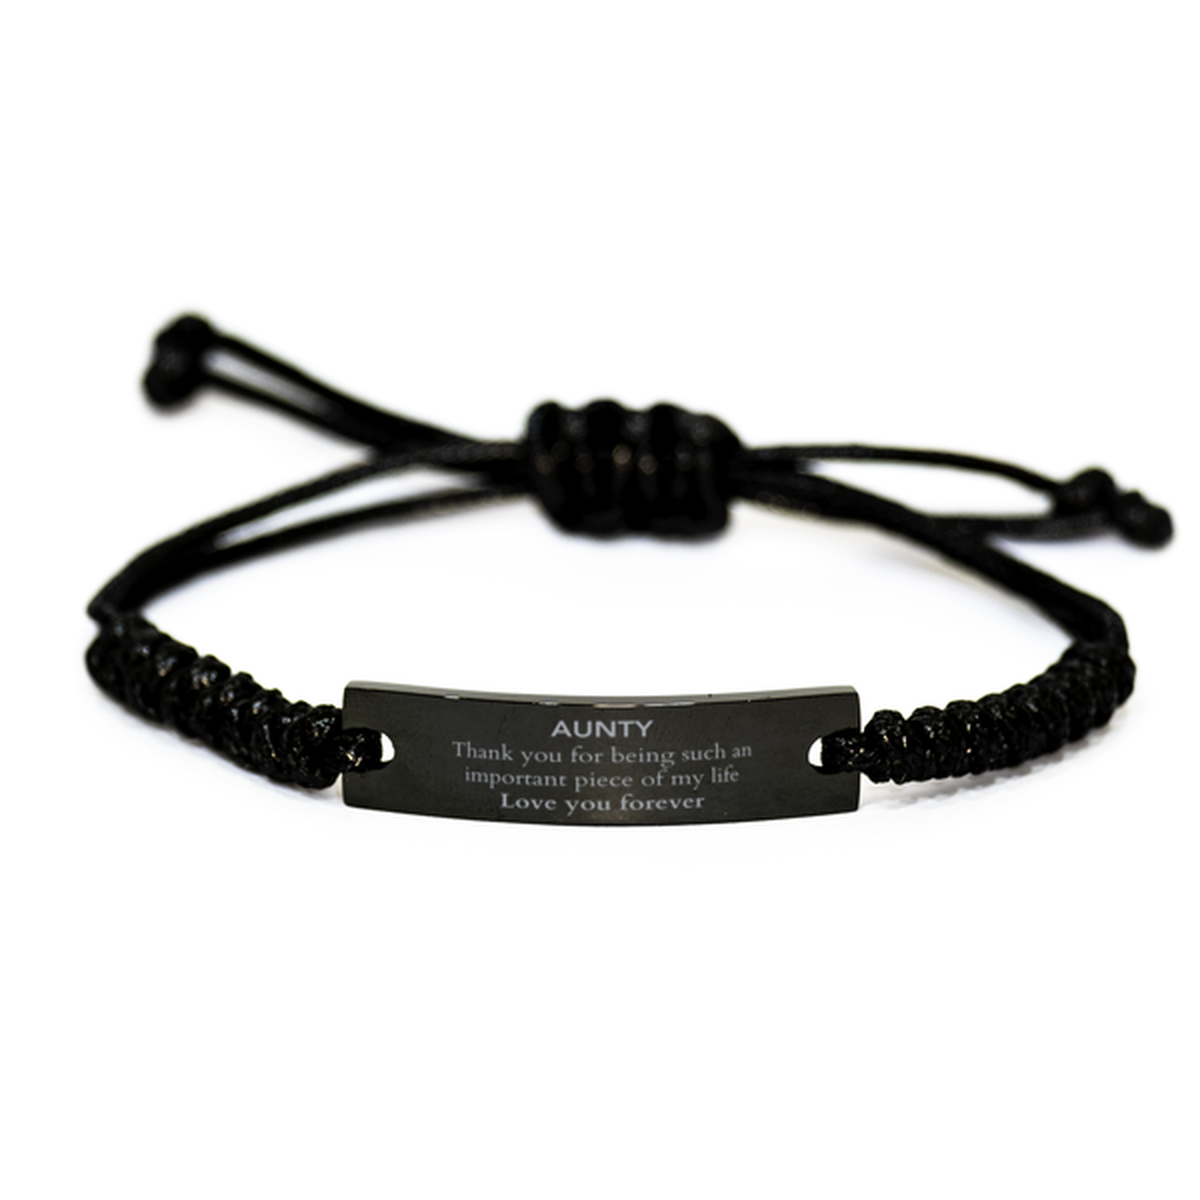 Appropriate Aunty Black Rope Bracelet Epic Birthday Gifts for Aunty Thank you for being such an important piece of my life Aunty Christmas Mothers Fathers Day